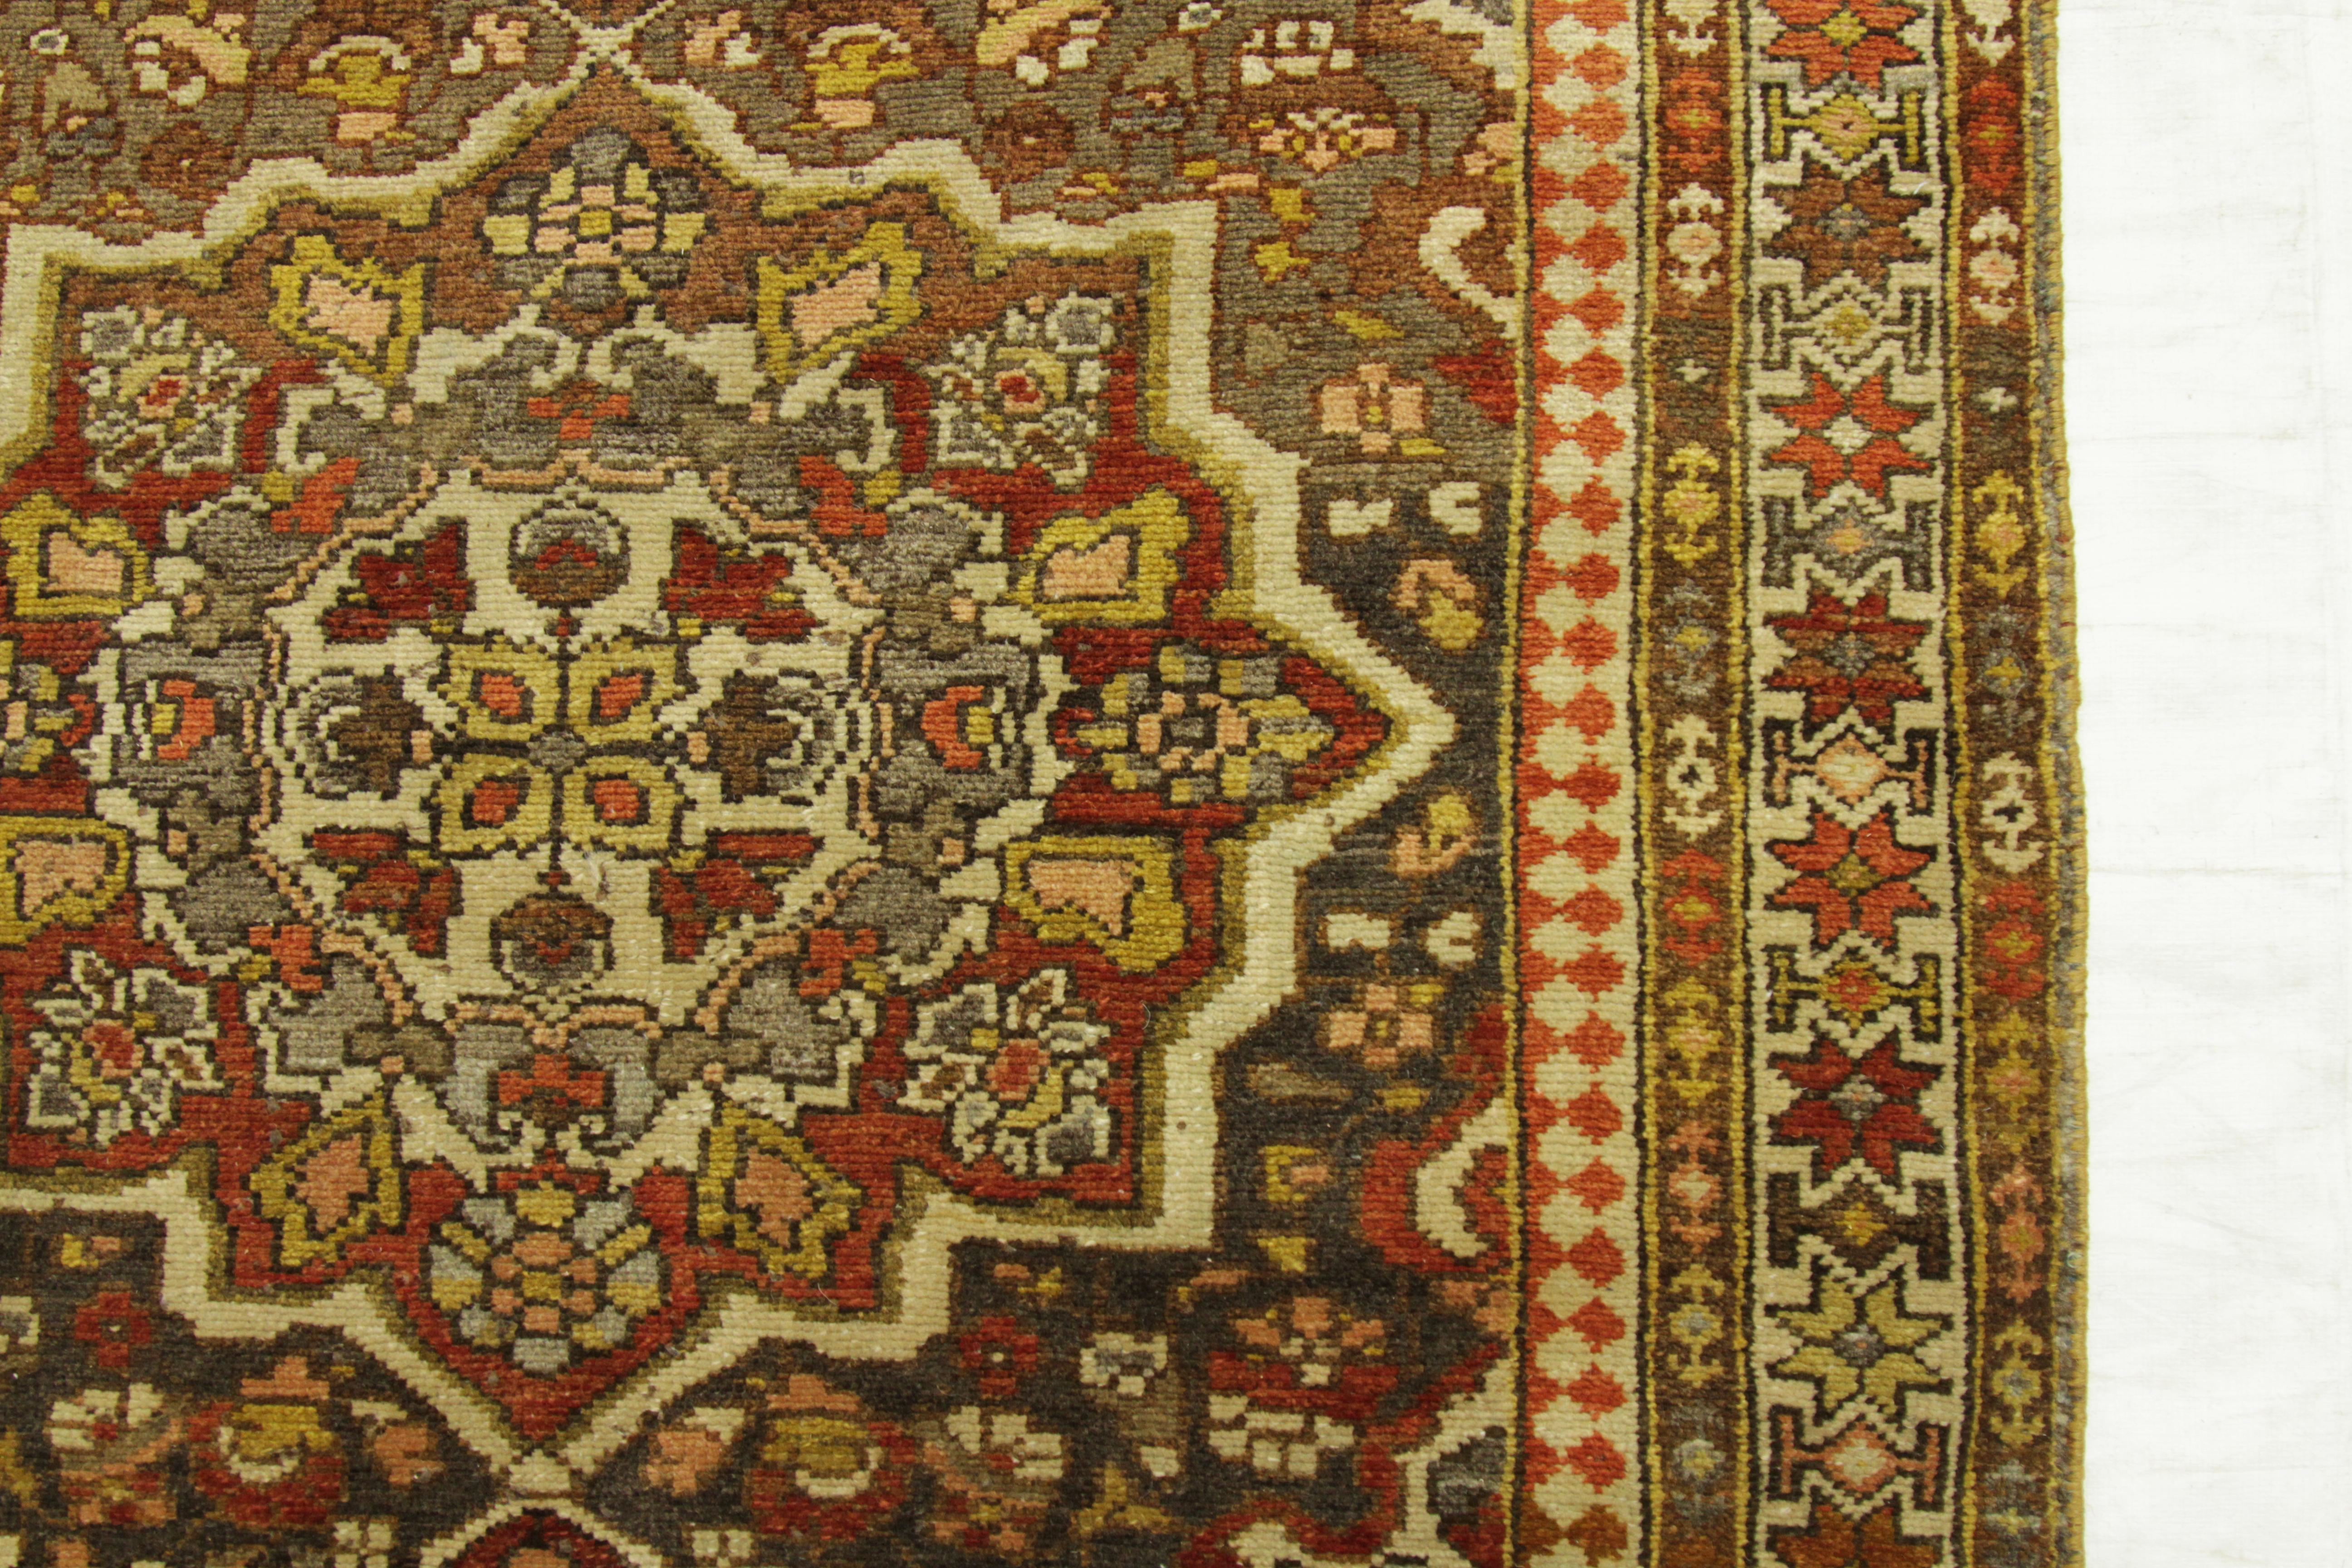 Antique Persian Rug Bakhtiari Design with Ornate Floral Patterns, circa 1940s For Sale 3